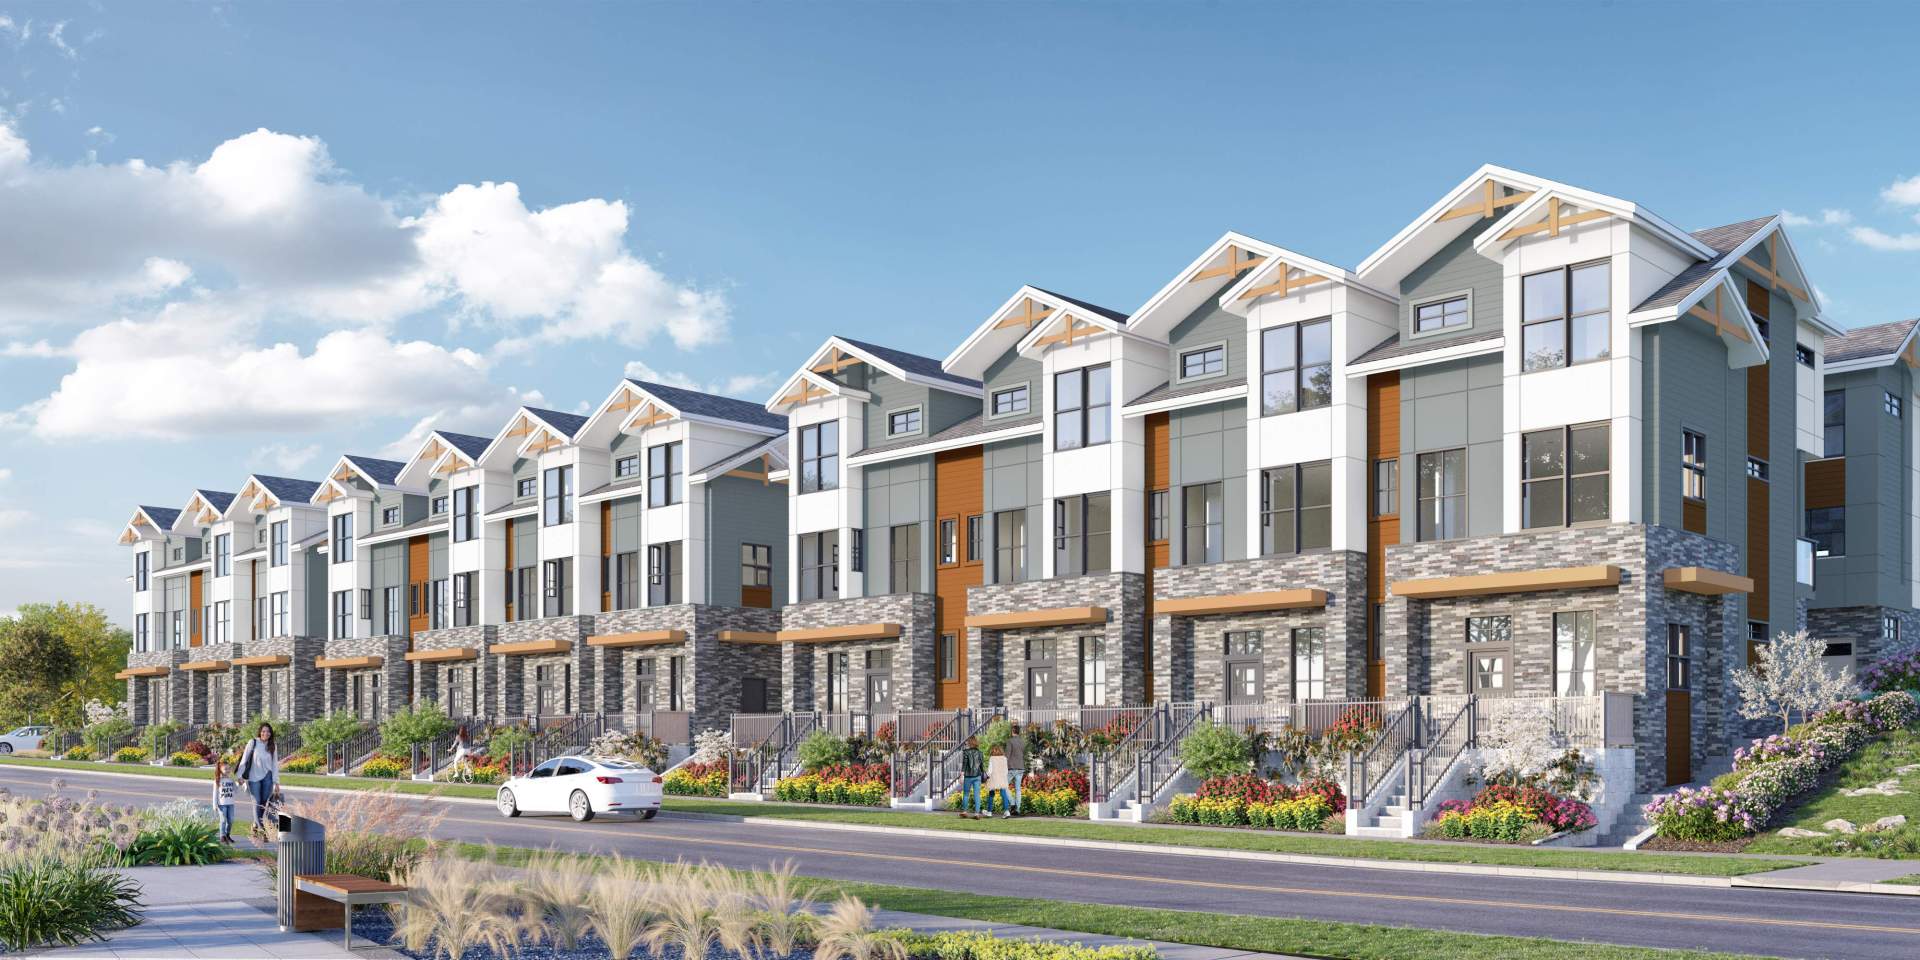 Harmony Townhomes by Apcon Group – 44 New Homes for Community-Oriented Living